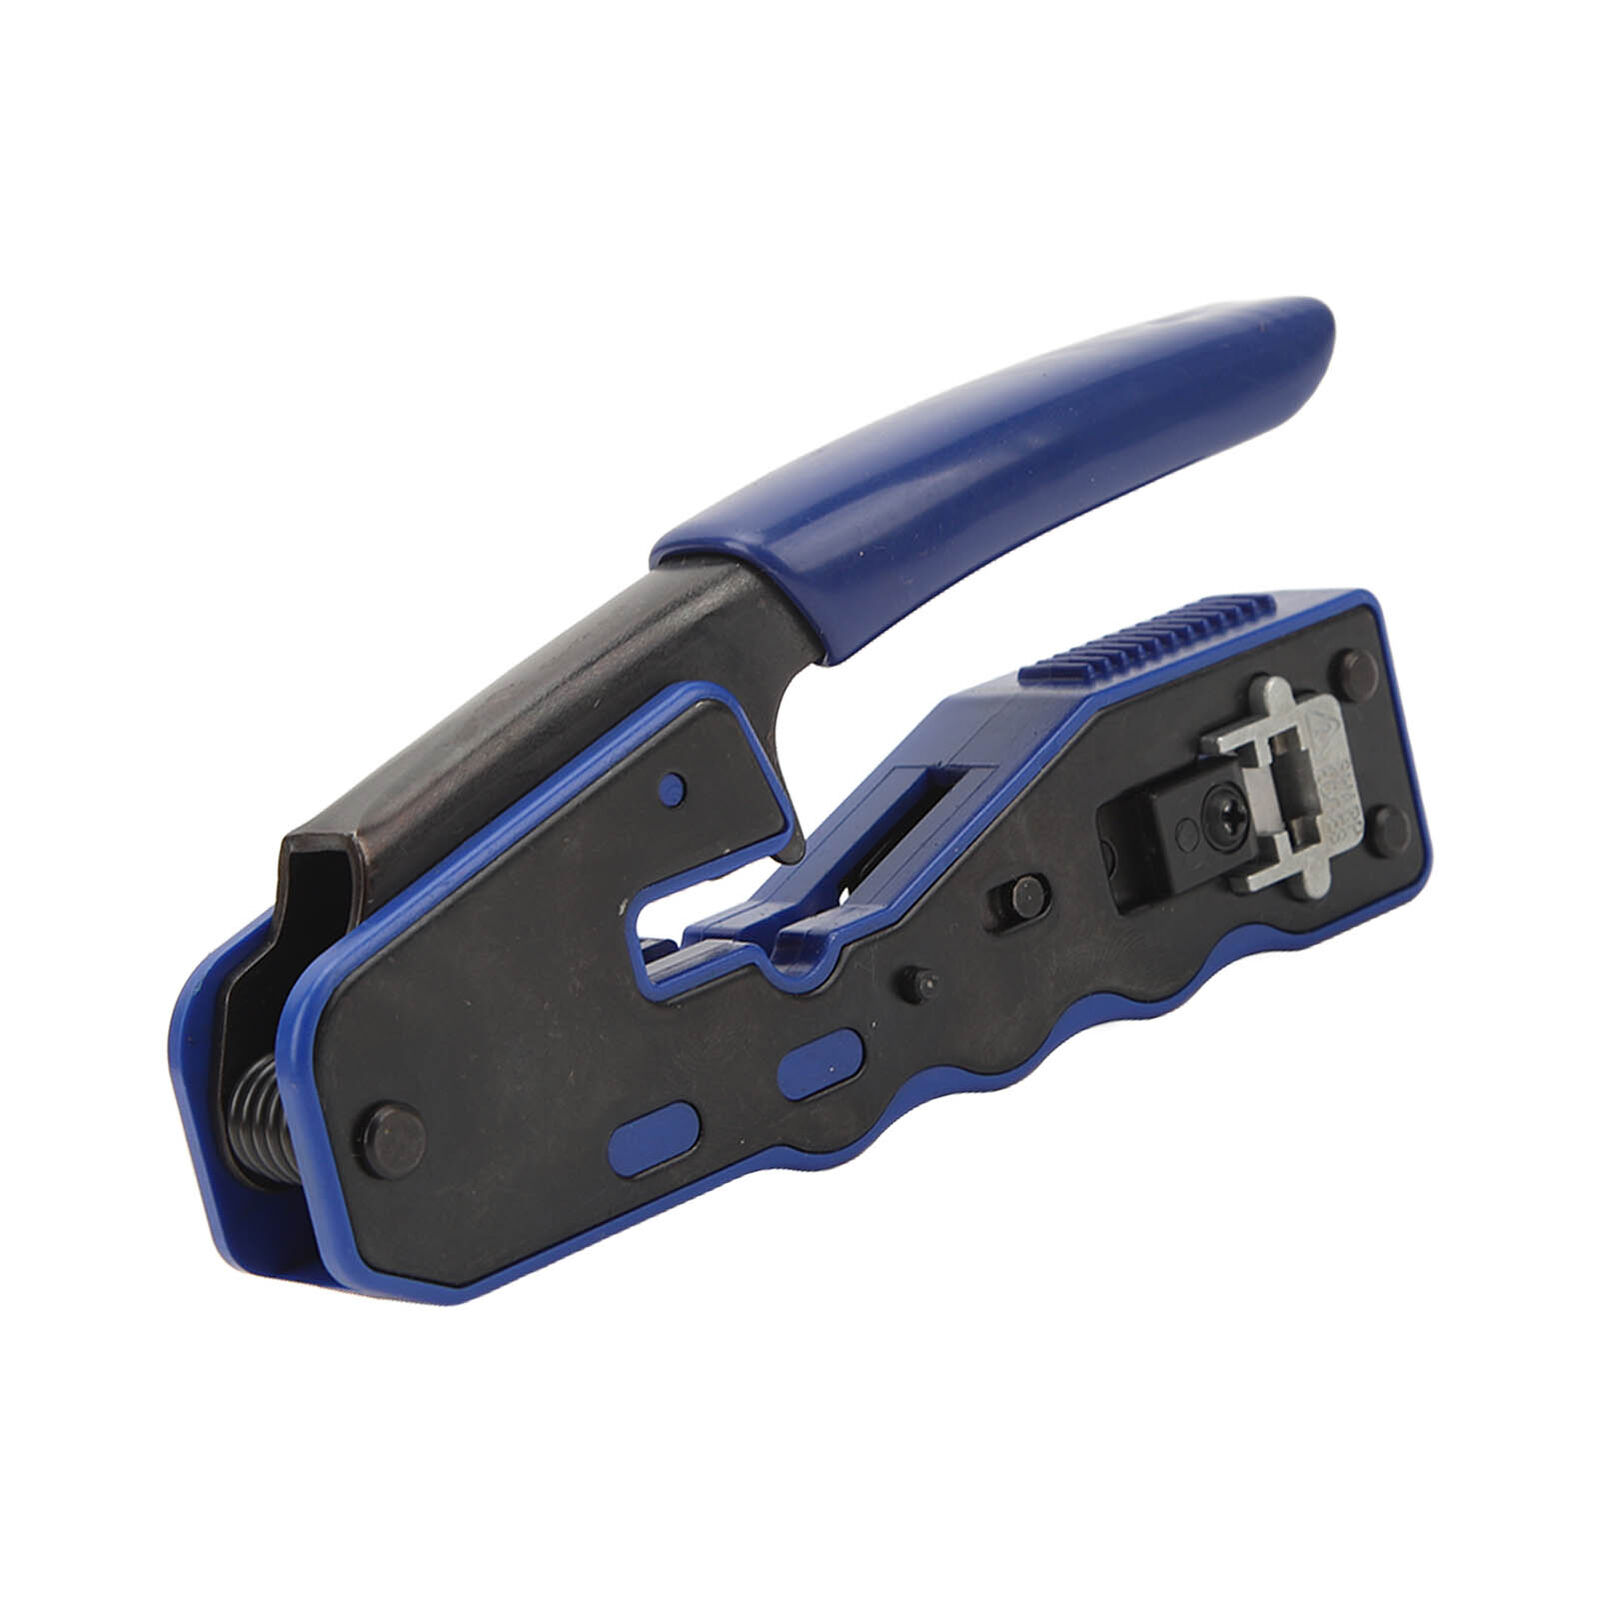 Crimp Tool Through Crimper With Head And Cover Cable Tester Cutter Stripper